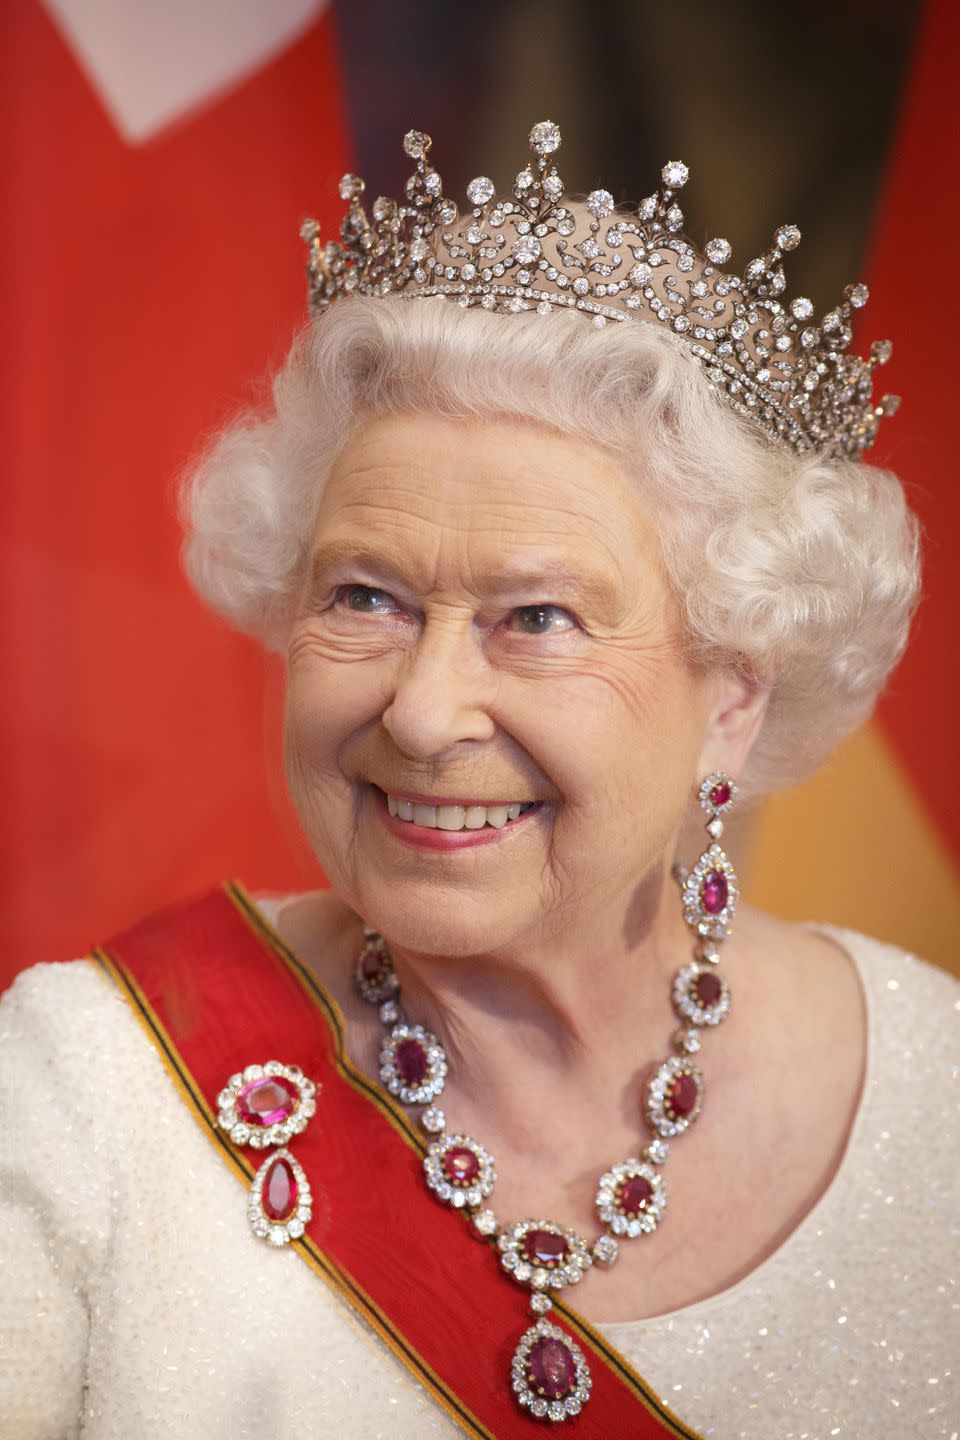 She is the longest-reigning monarch in British history